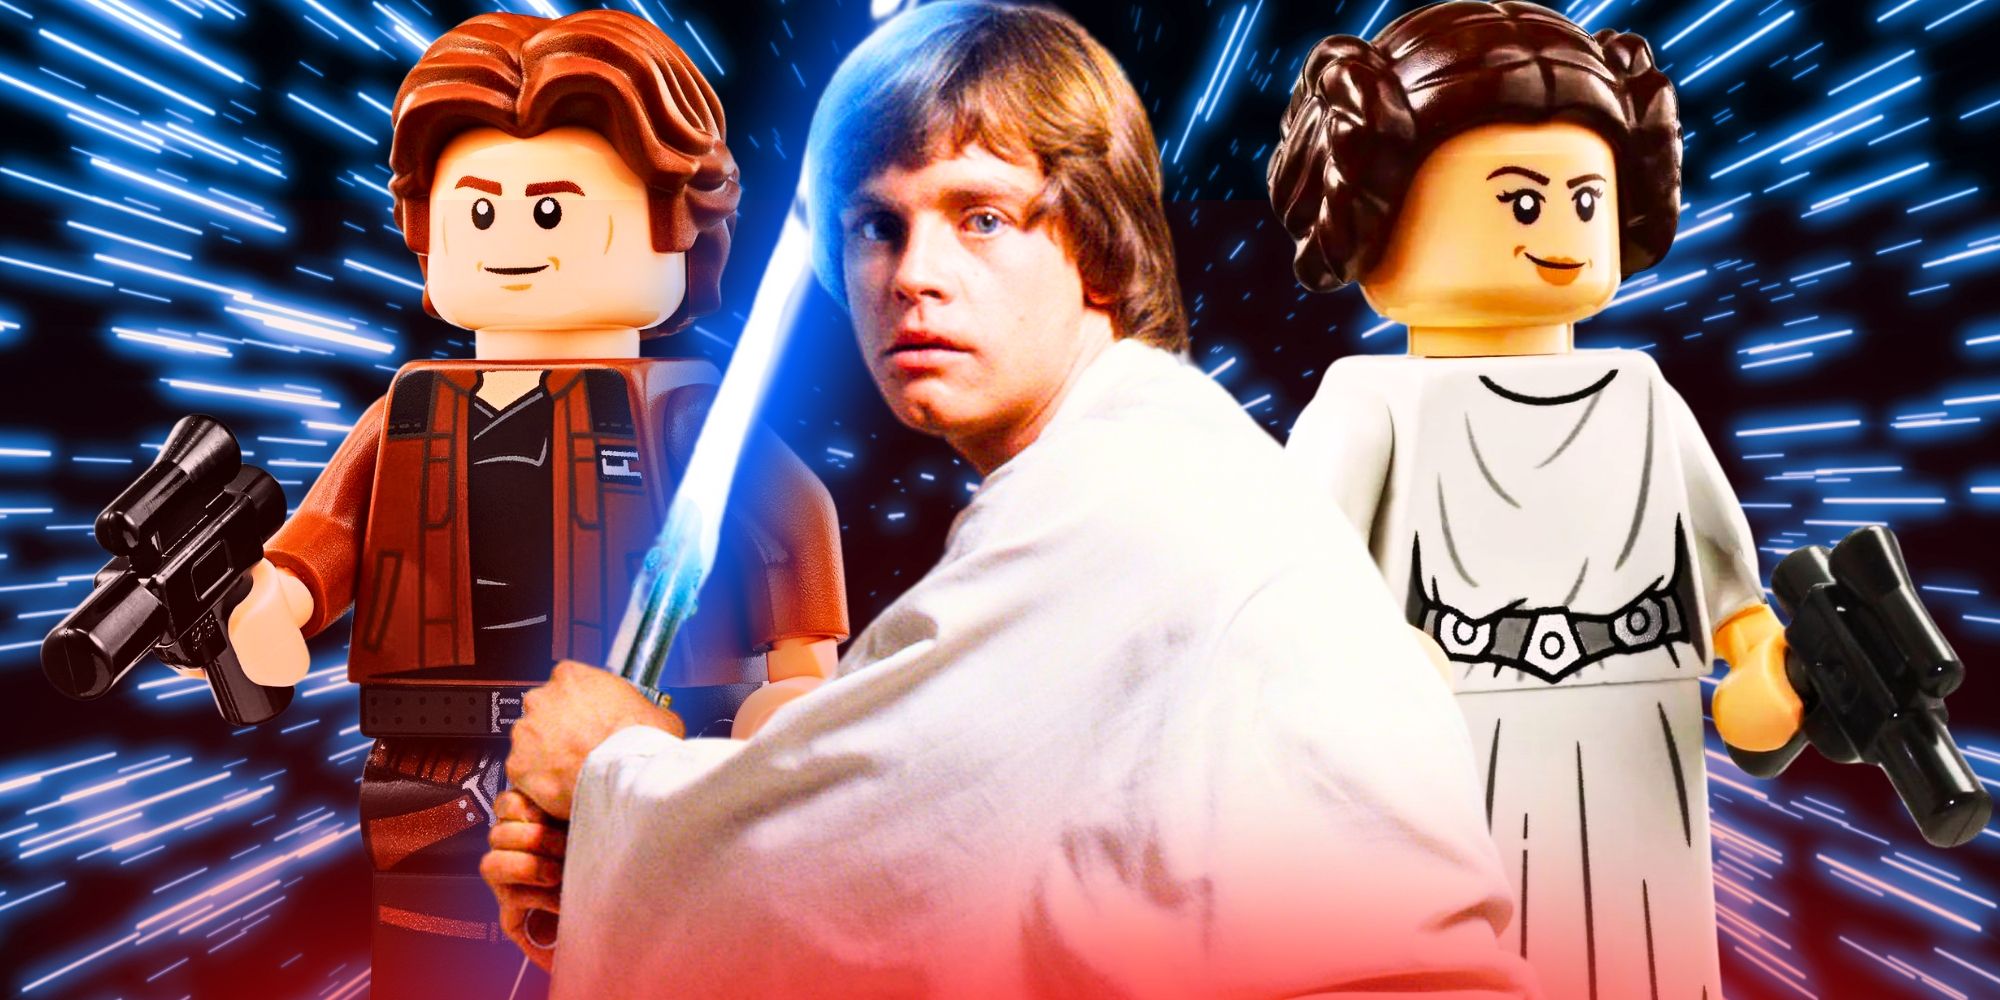 Luke Skywalker With a Blue Lightsaber in front of Lego Mini Figures of Han and Princess Leia